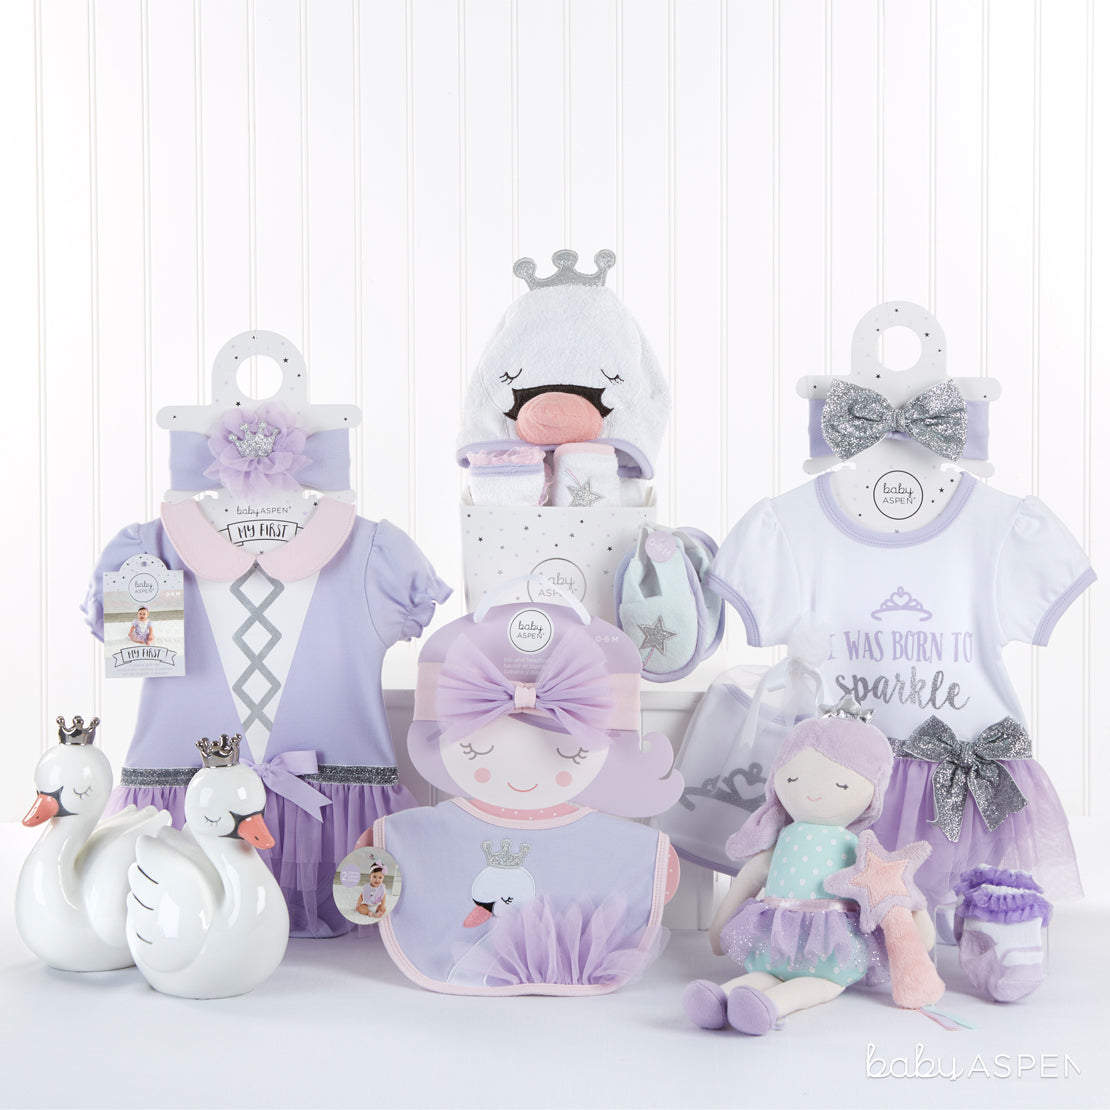 Fairy Princess Group Shot | Magical Gifts For Your Fairy Princess | Baby Aspen